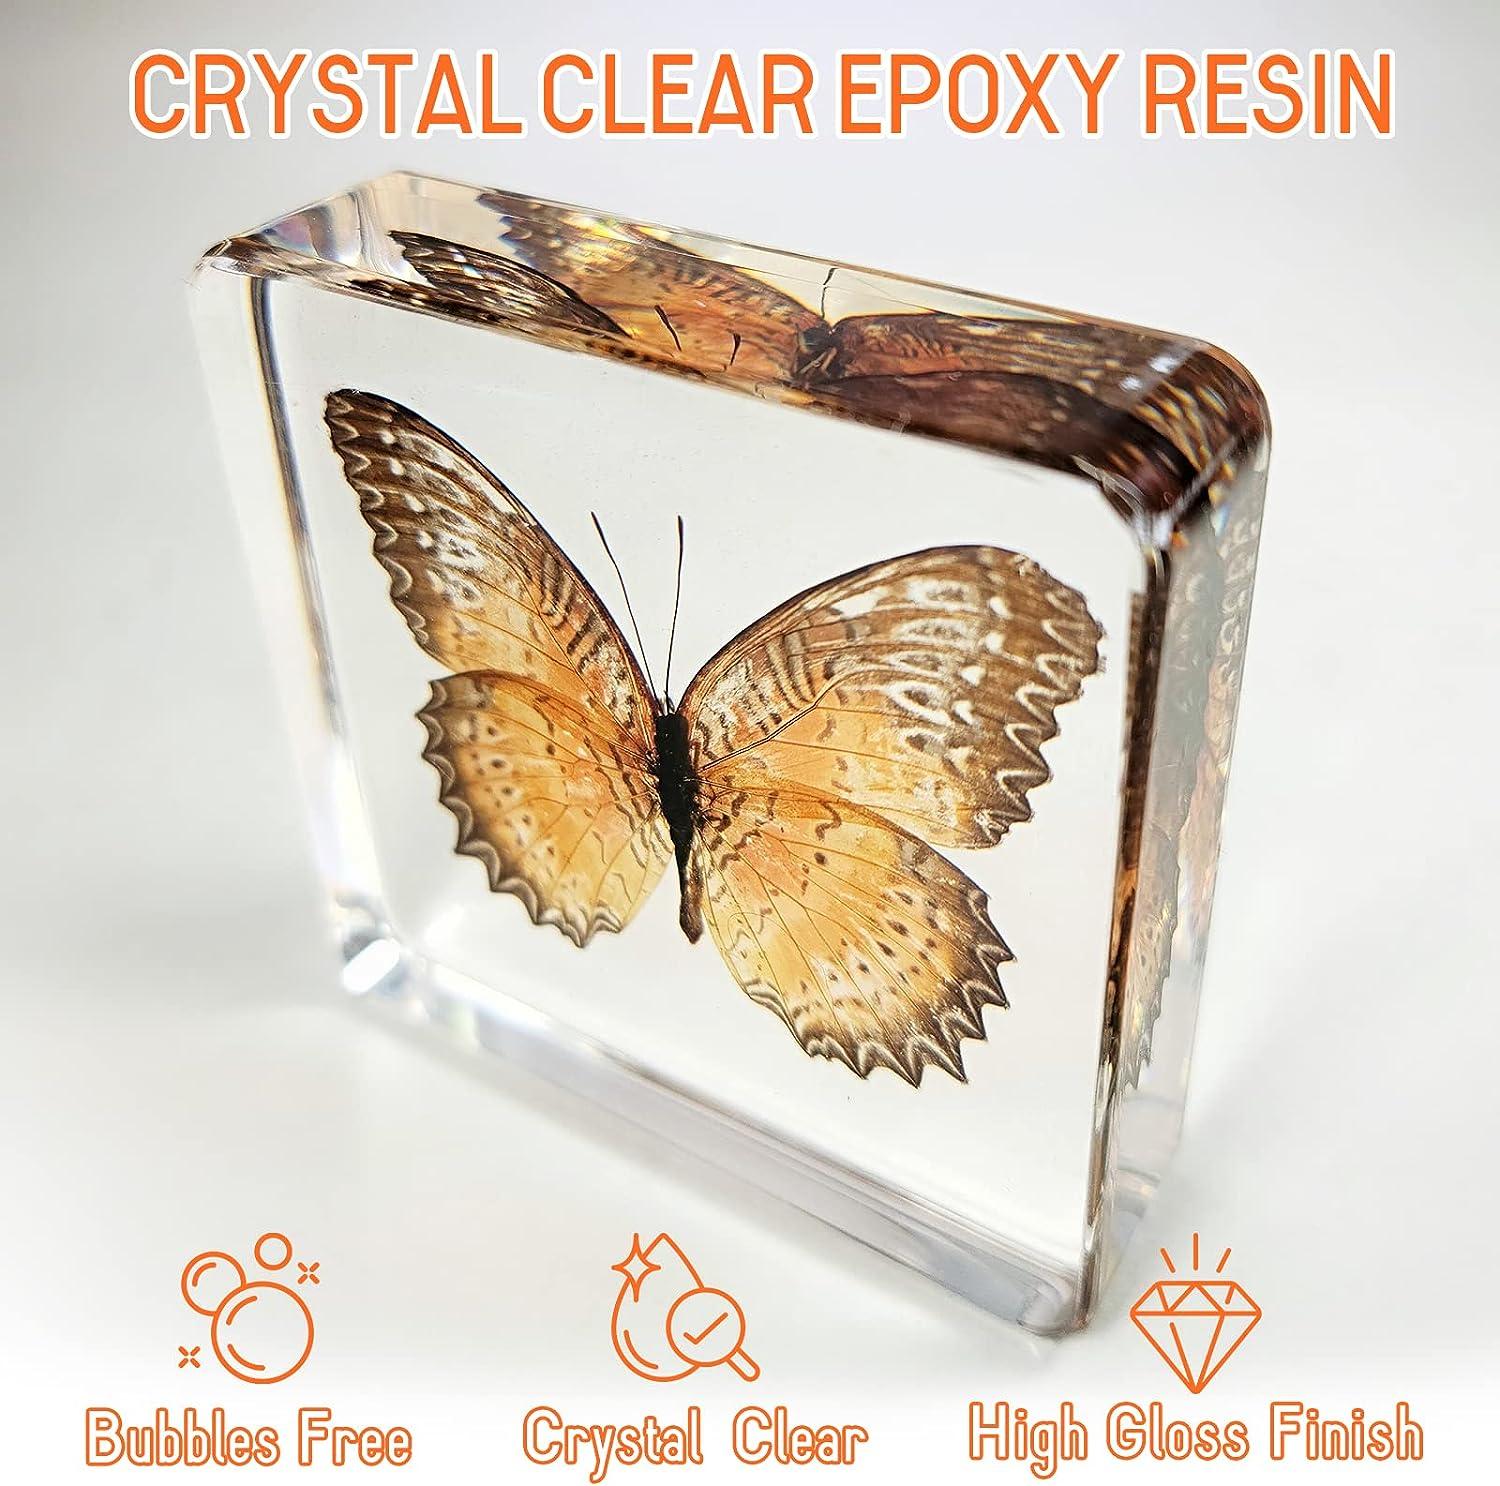 NASUBI 1.06 Gallon Clear Epoxy Resin - Upgraded Casting and